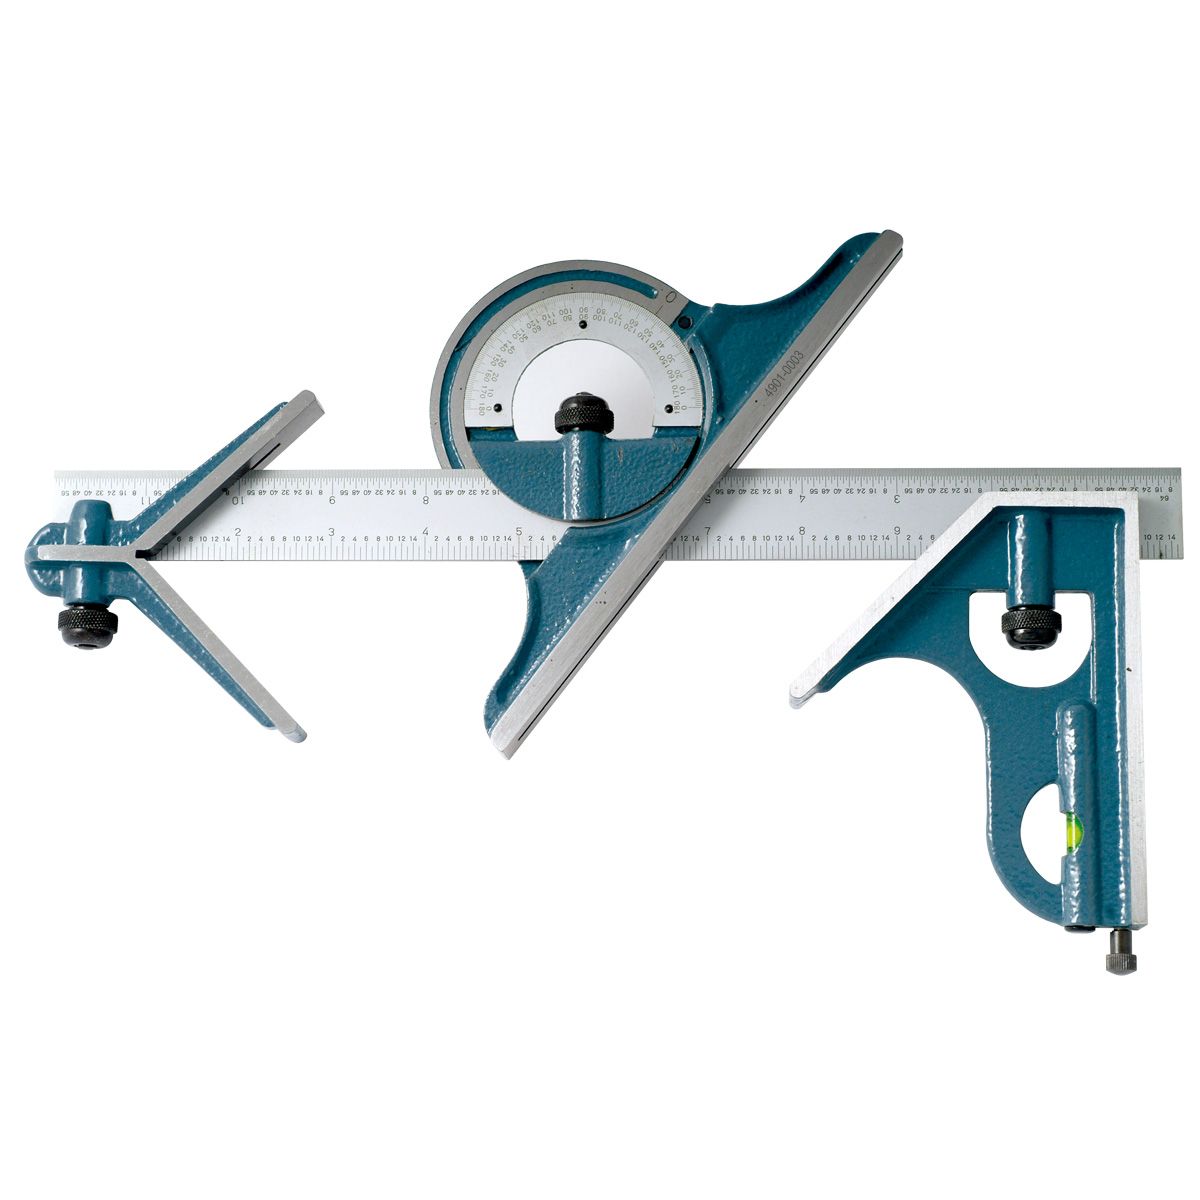 4 PIECE COMBINATION SQUARE SET WITH 12" 4R BLADE (4901-0003)